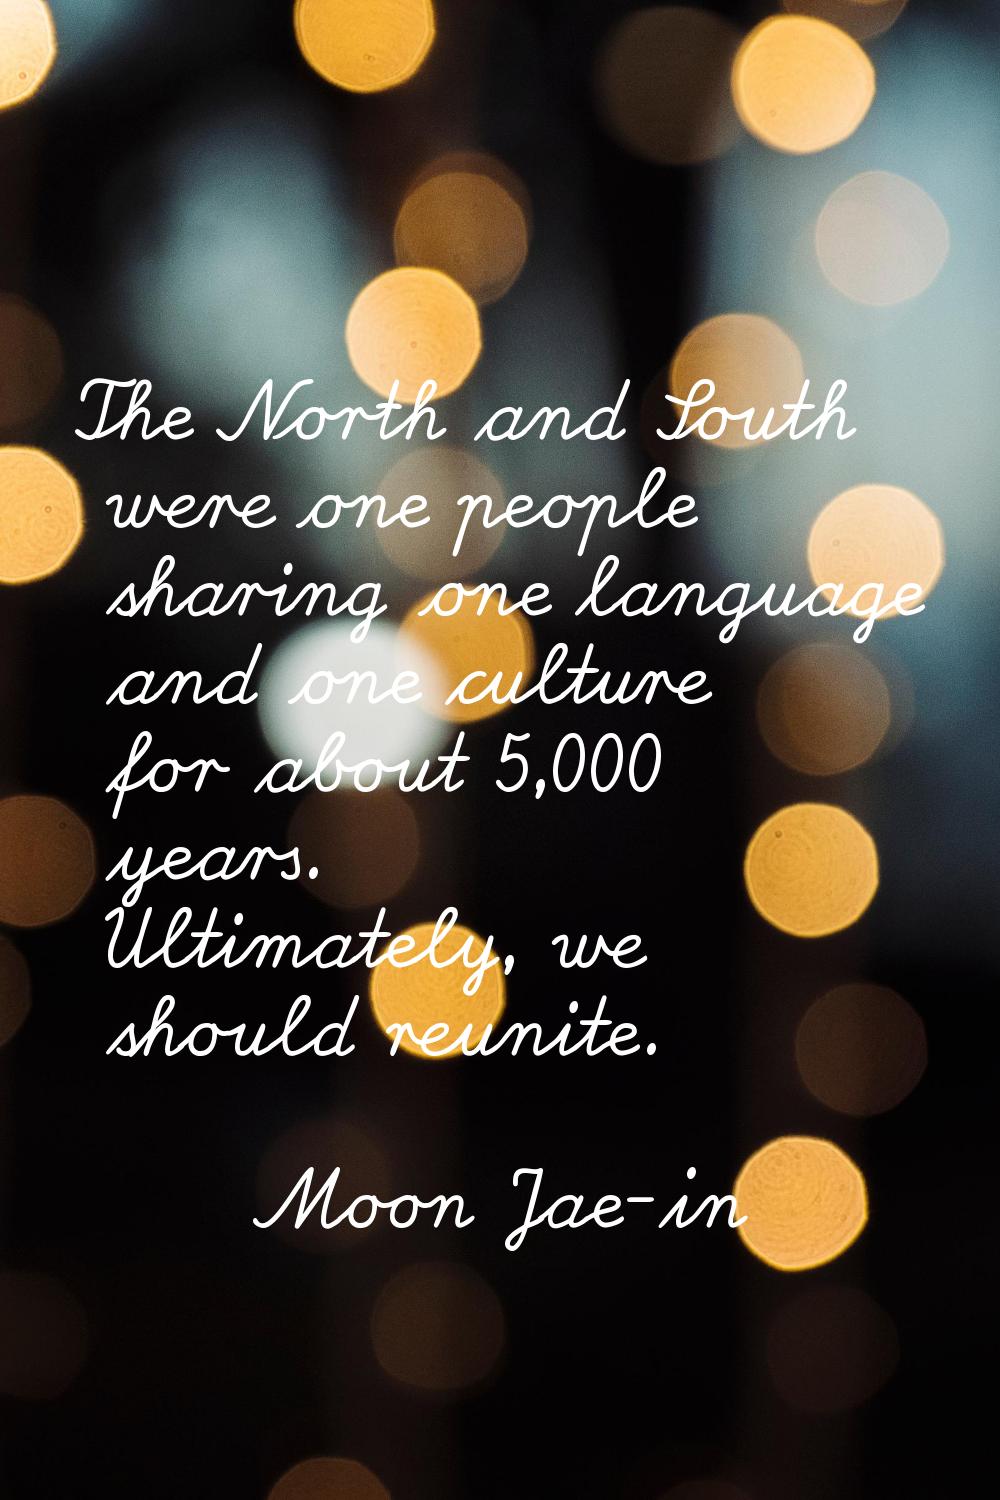 The North and South were one people sharing one language and one culture for about 5,000 years. Ult